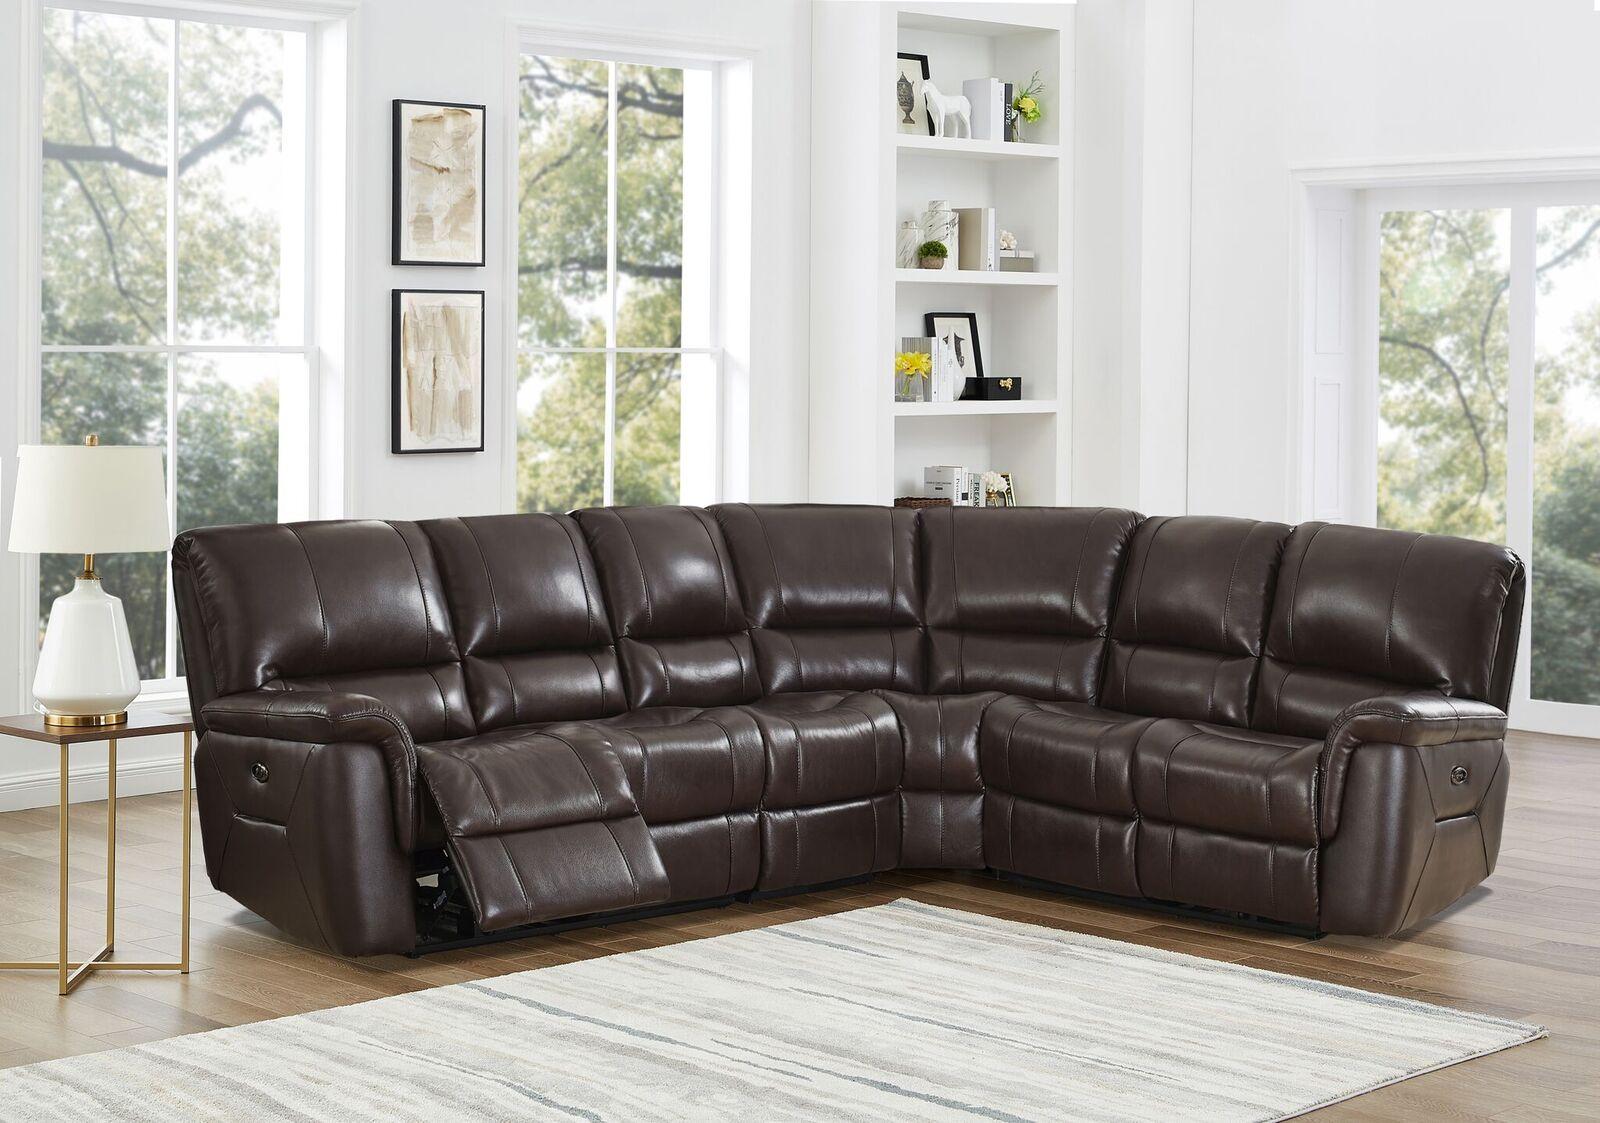 Modern Reclining Sectional Hydeline Bidwell Bidwell-P-BRN-SECT in Brown Top grain leather